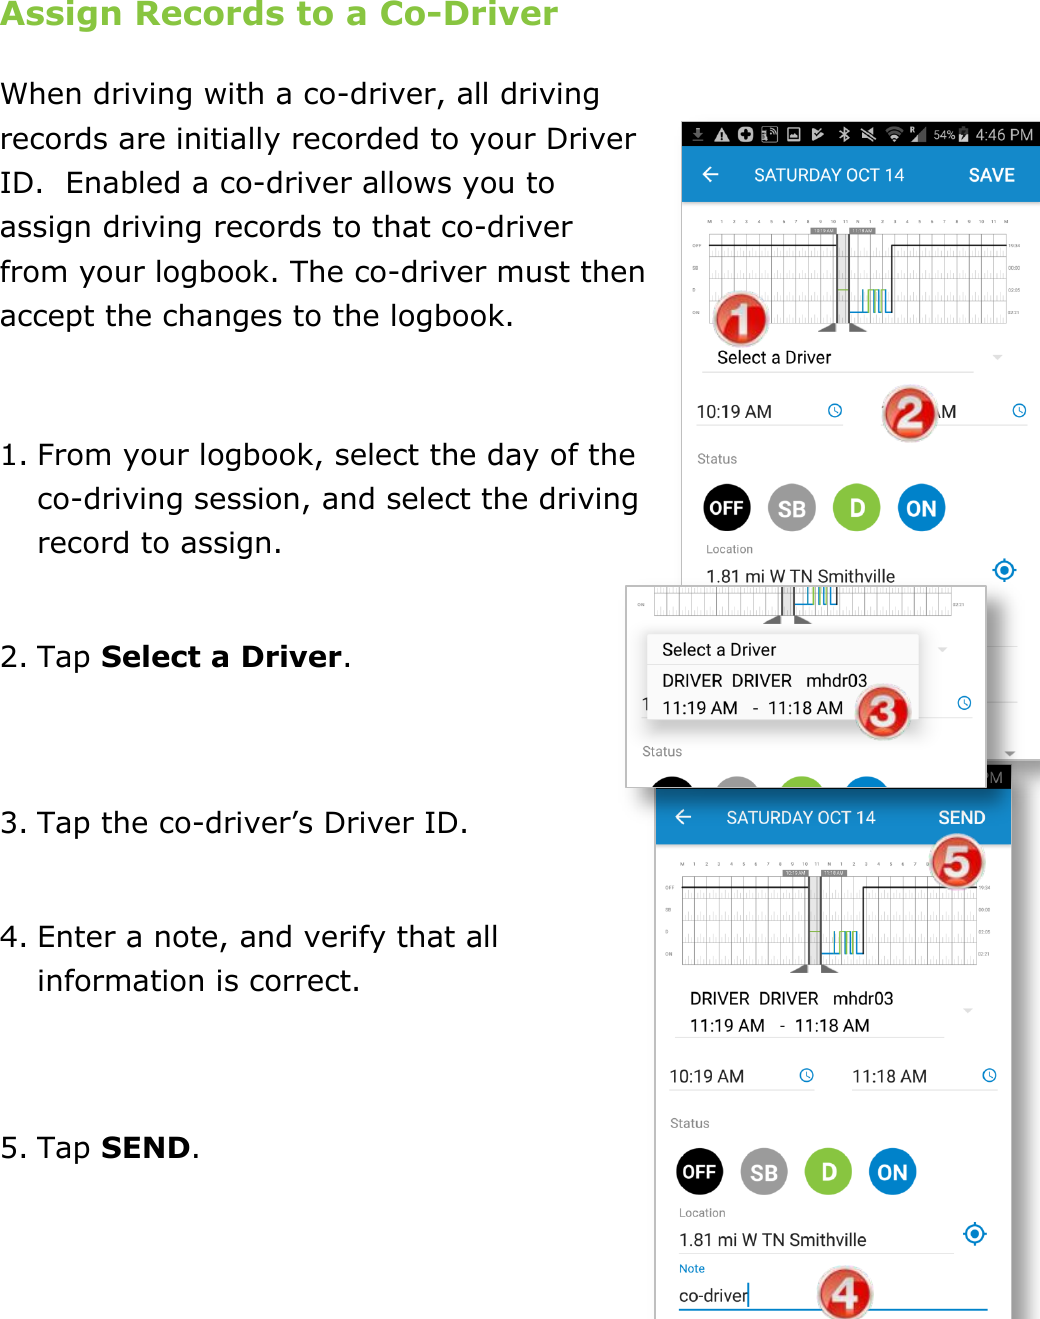 Manage Fuel Purchases DriverConnect User Guide  50 © 2017, Rand McNally, Inc. Assign Records to a Co-Driver When driving with a co-driver, all driving records are initially recorded to your Driver ID.  Enabled a co-driver allows you to assign driving records to that co-driver from your logbook. The co-driver must then accept the changes to the logbook.  1. From your logbook, select the day of the co-driving session, and select the driving record to assign.  2. Tap Select a Driver.   3. Tap the co-driver’s Driver ID.  4. Enter a note, and verify that all information is correct.   5. Tap SEND.   